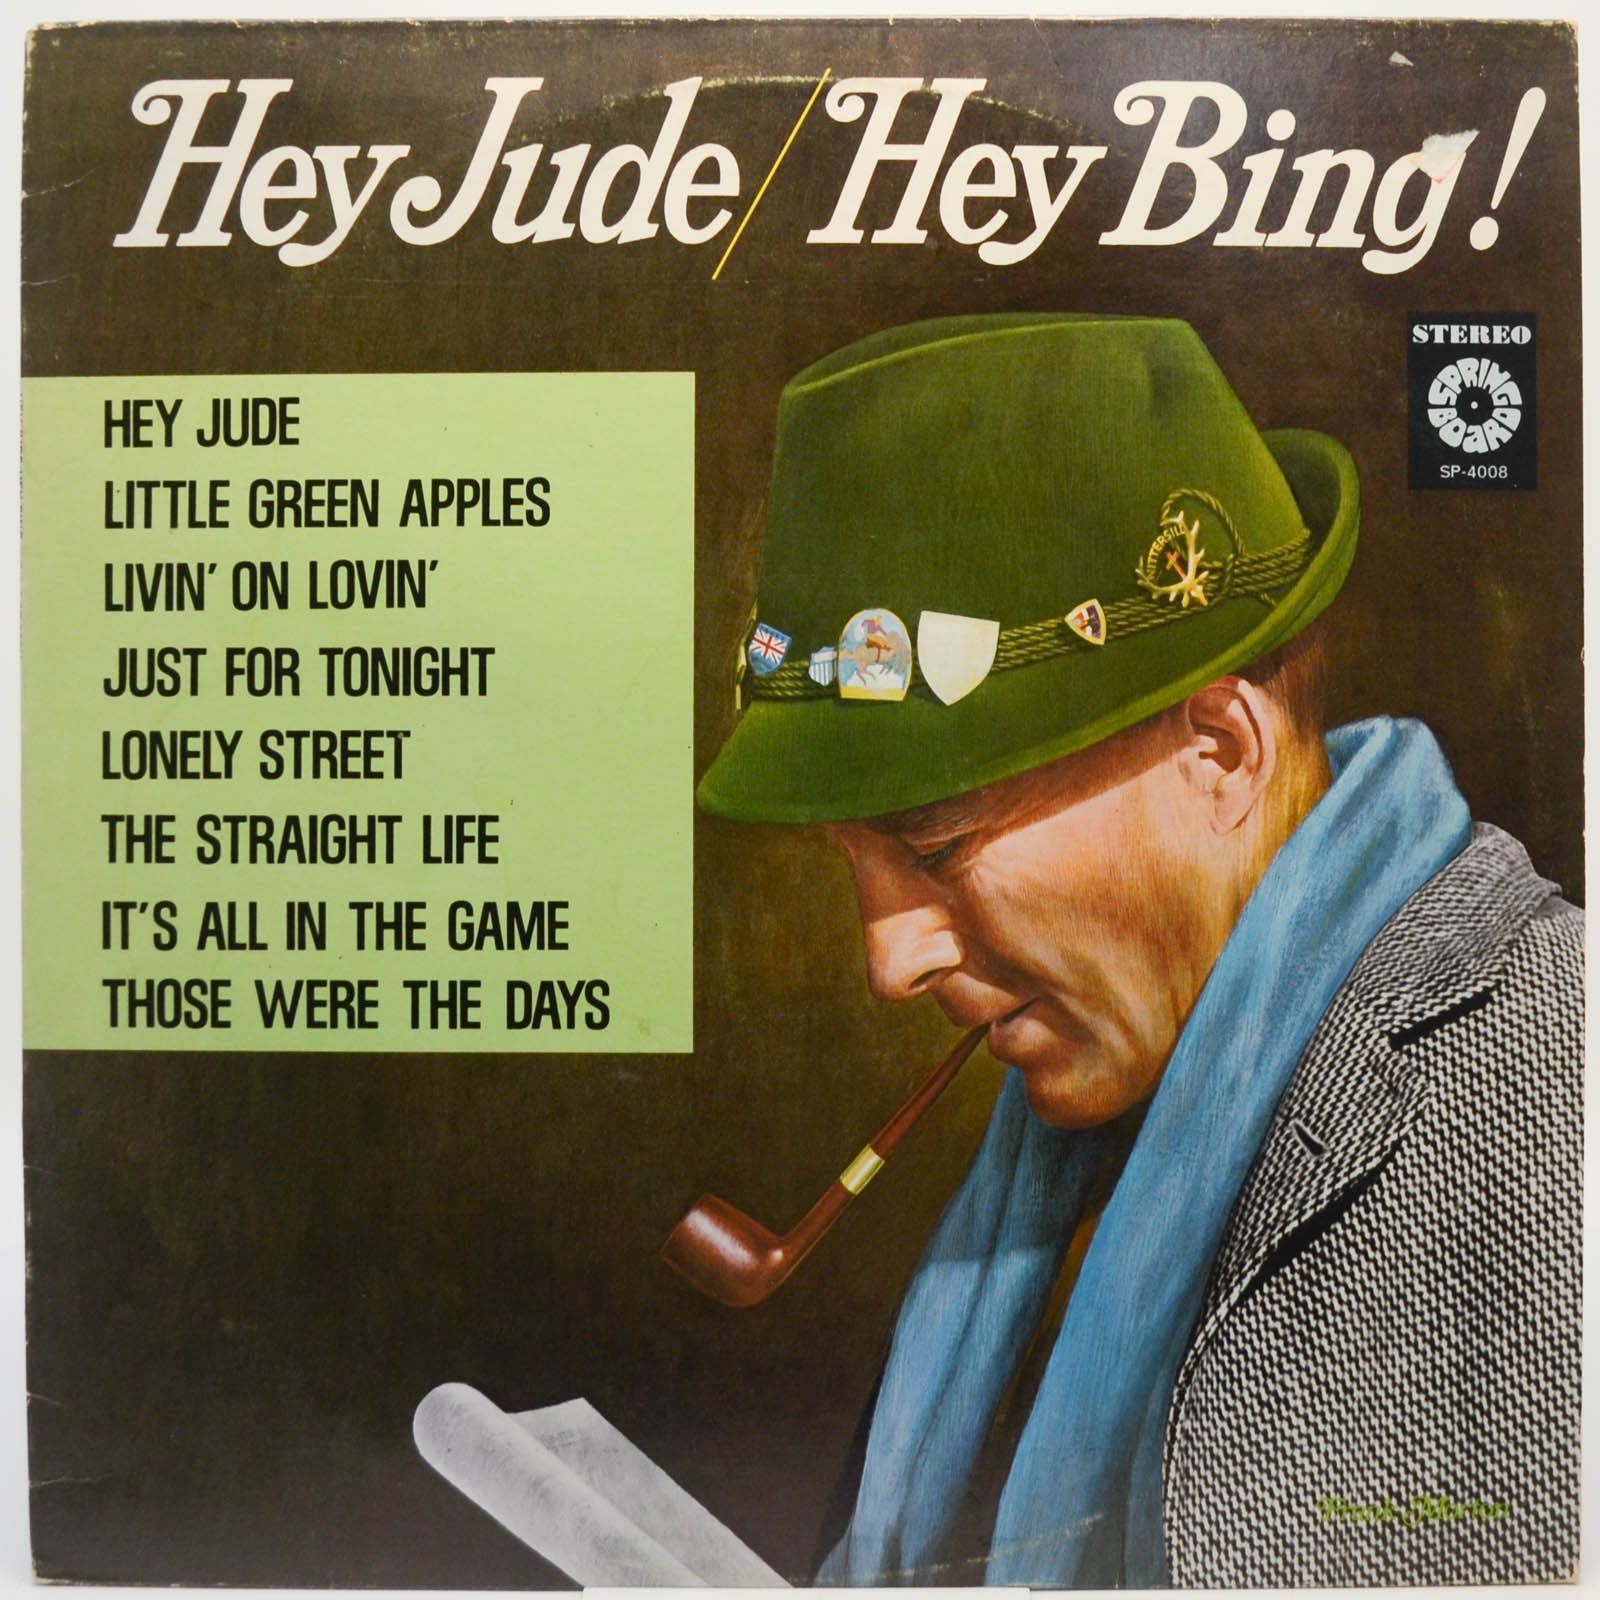 Bing Crosby With The Jimmy Bowen Orchestra And Chorus — Hey Jude / Hey Bing! (USA), 1968